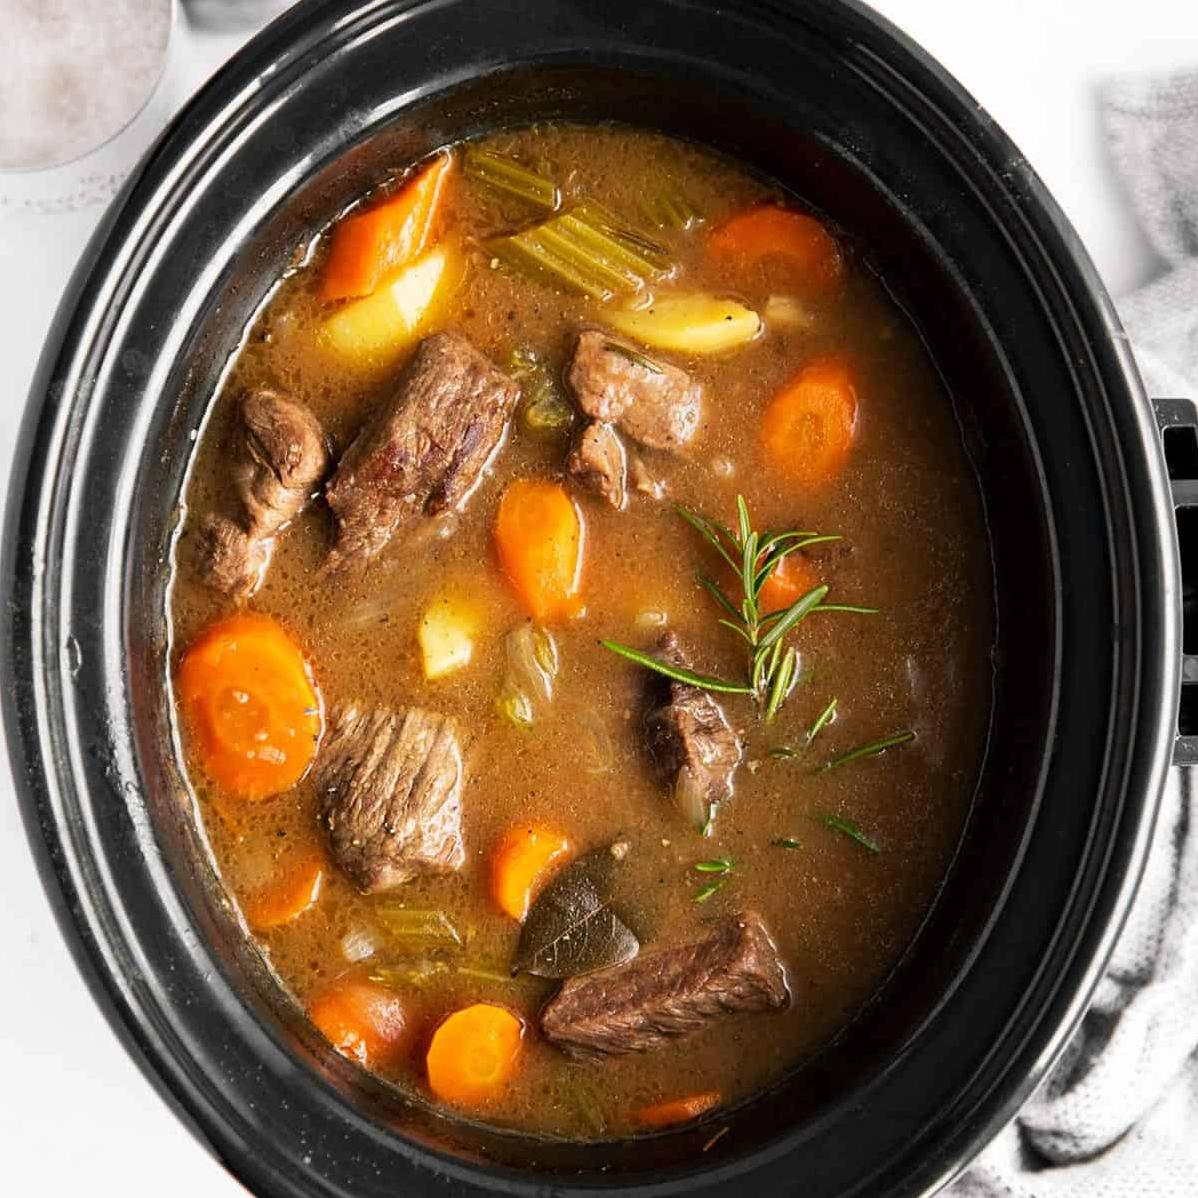  Slow-cooking has never looked this good in photos!